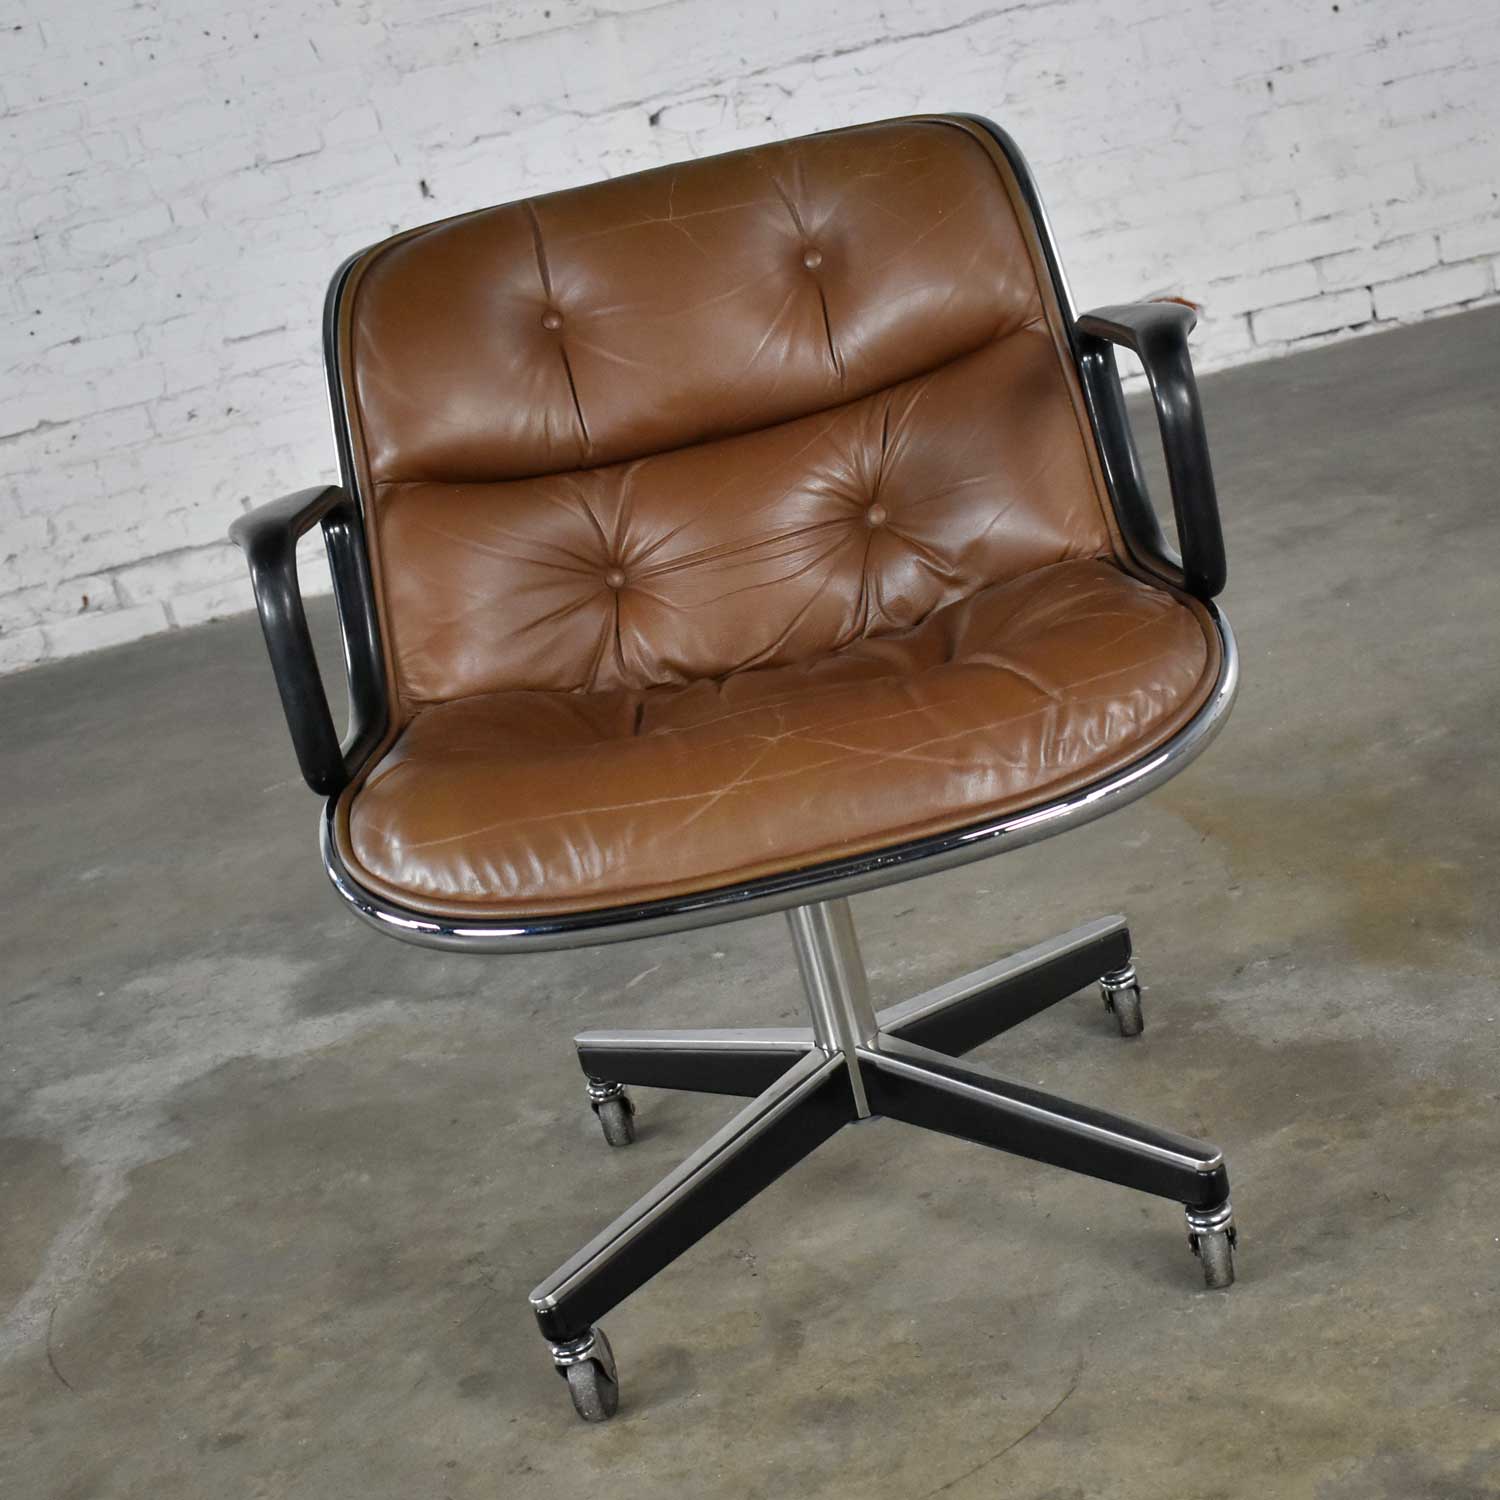 Executive Armchair by Charles Pollock for Knoll Brown Leather with 4 Prong Base